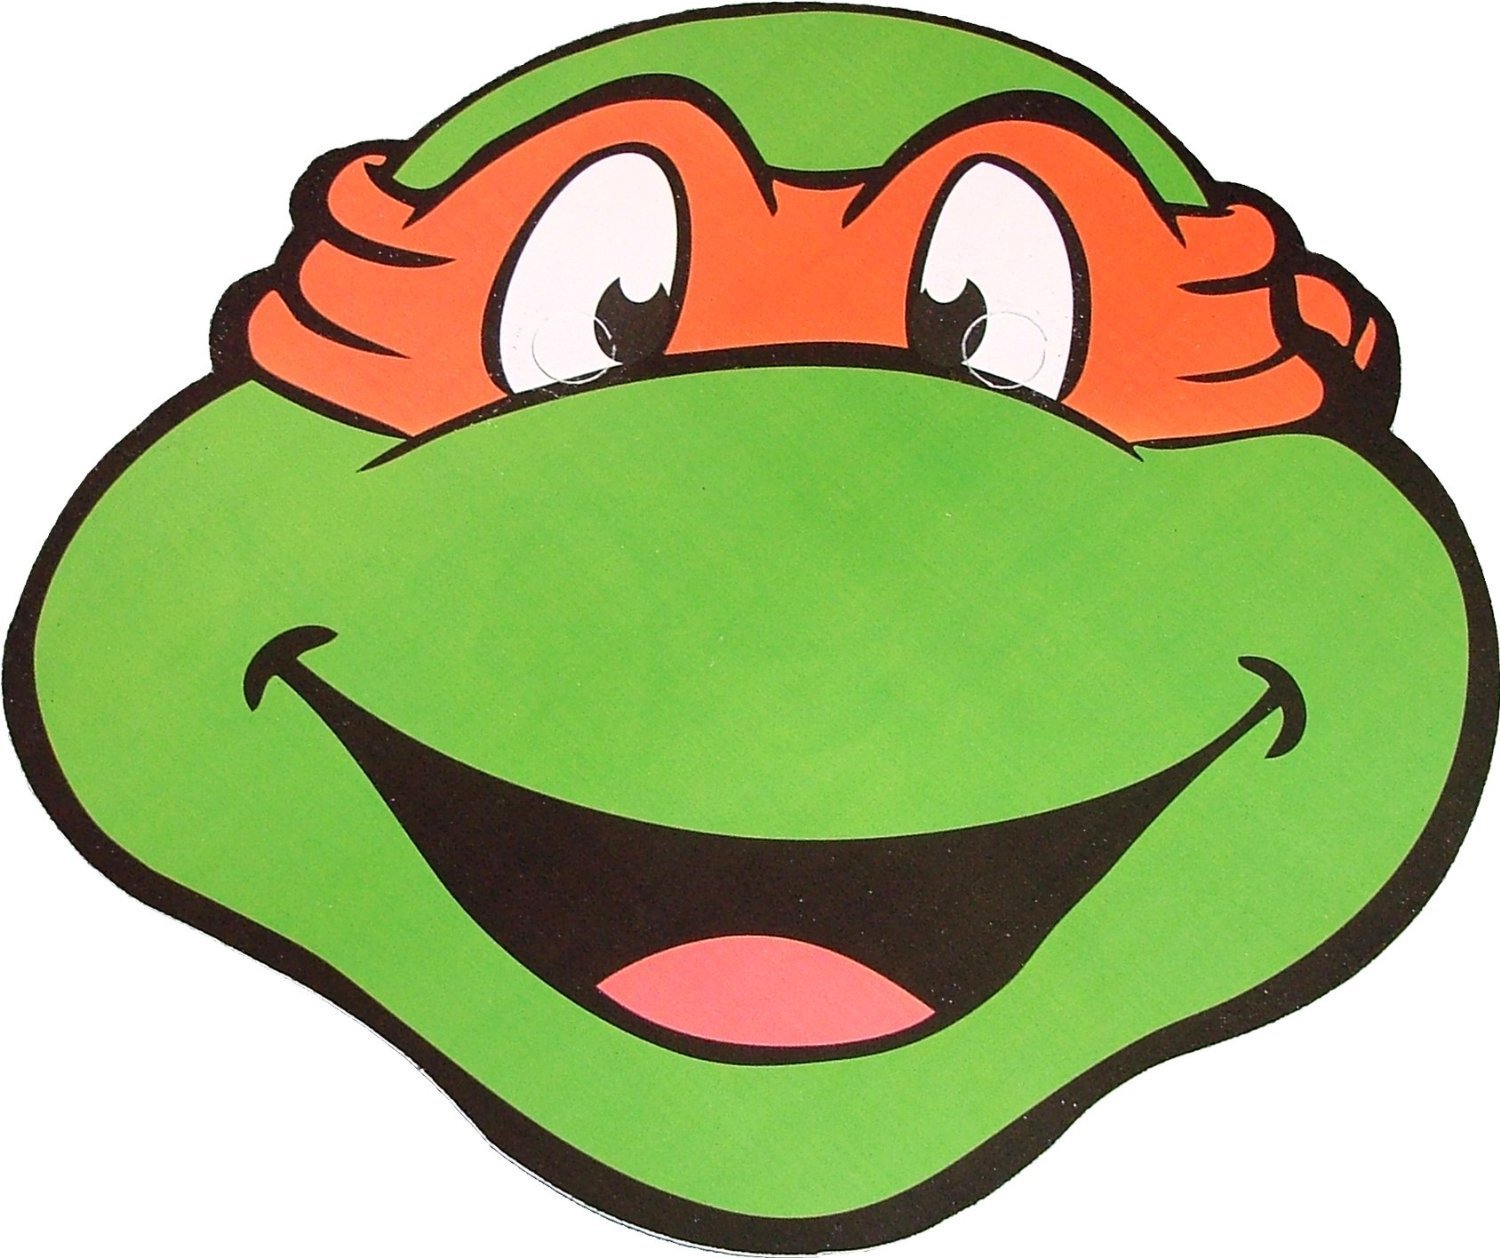 Ninja Turtles Face Pictures Free Cliparts That You Can Download To